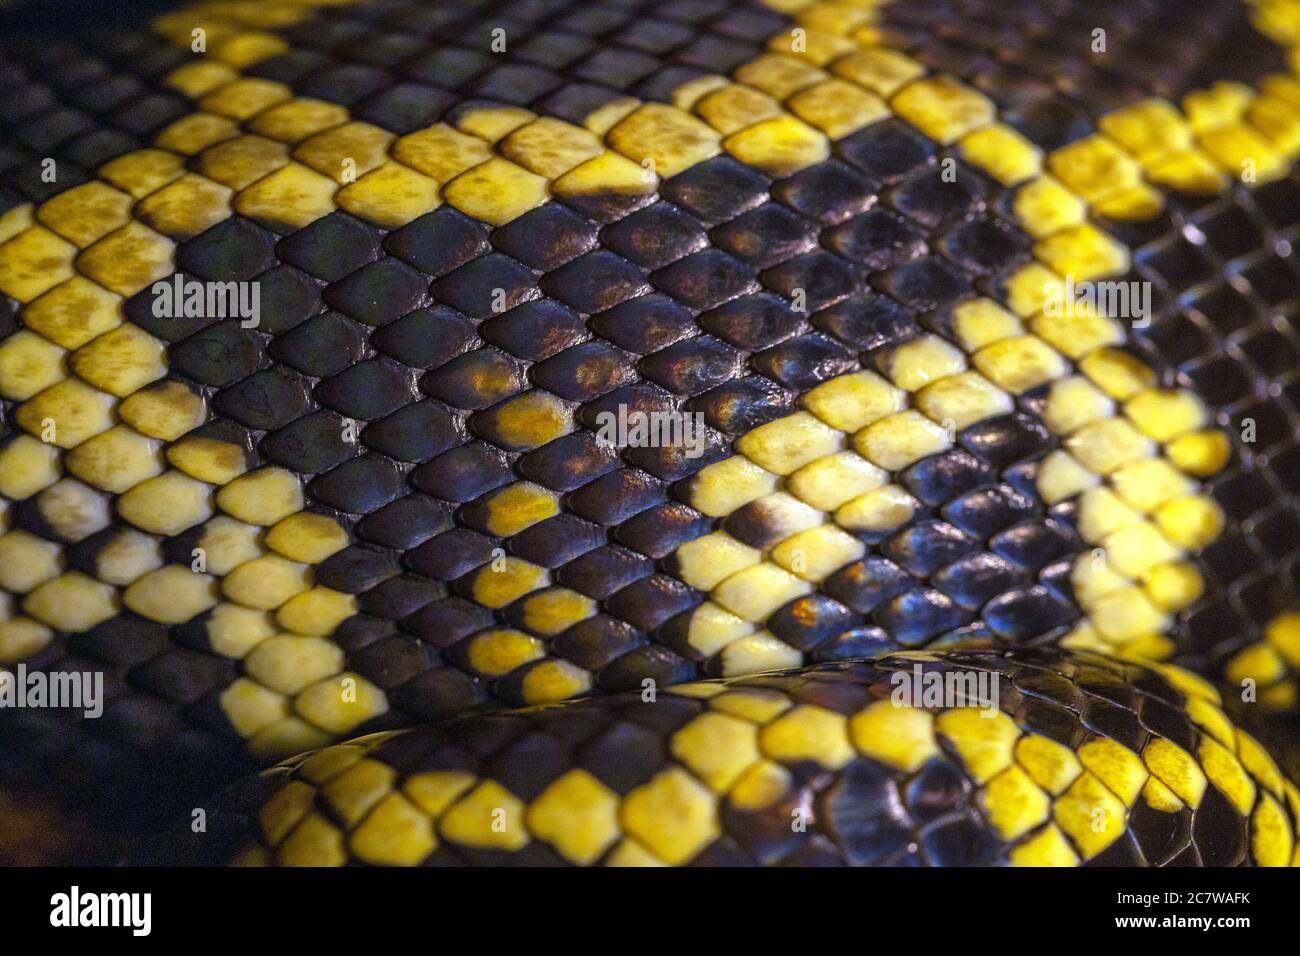 https://c8.alamy.com/comp/2C7WAFK/macro-of-python-skin-and-scale-close-up-black-and-yellow-snake-skin-texture-background-pattern-2C7WAFK.jpg